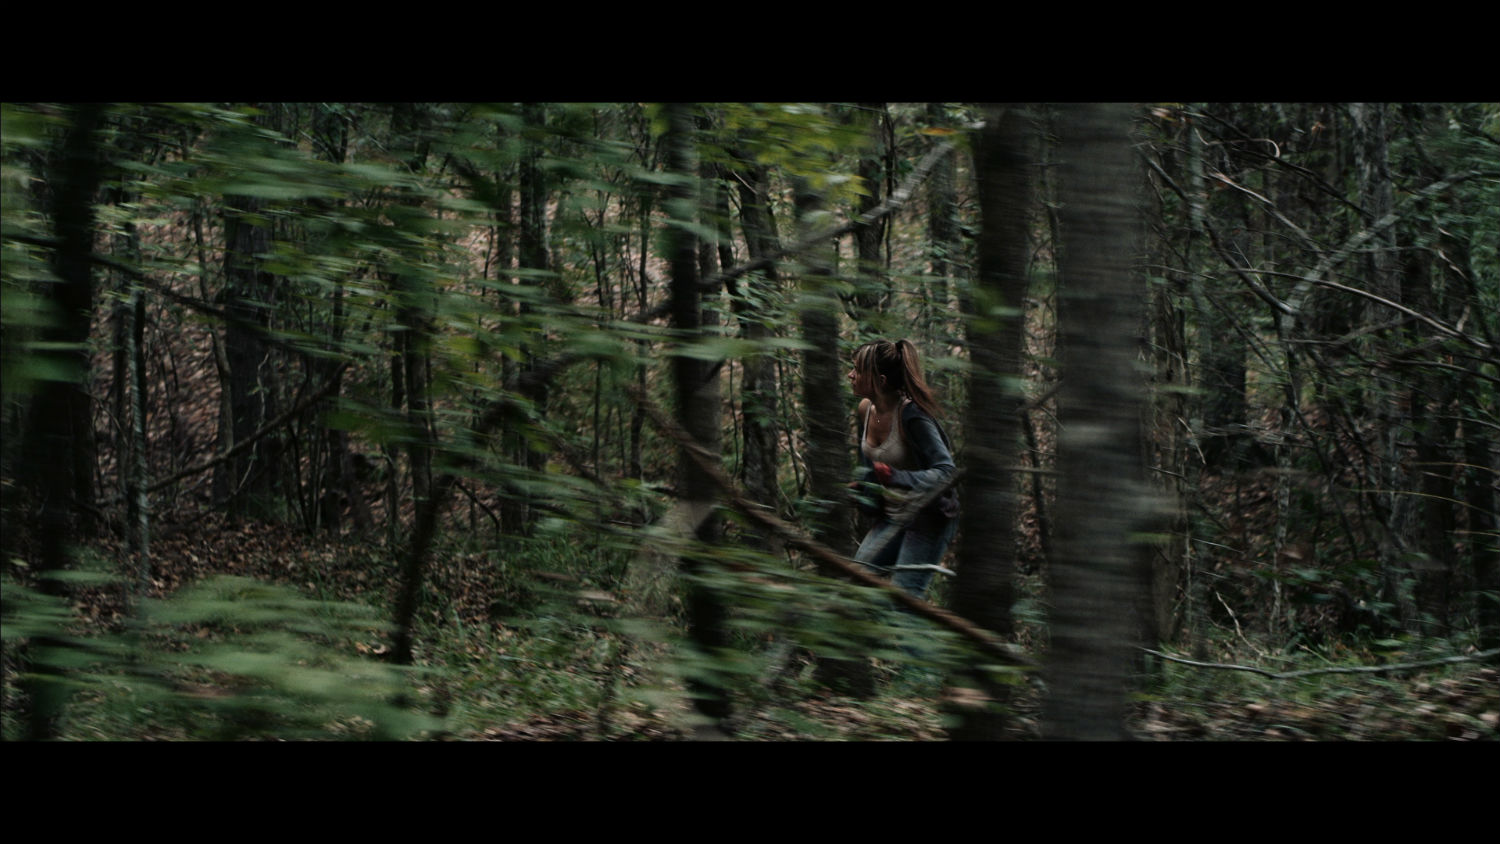 Girl in Woods Synposis.